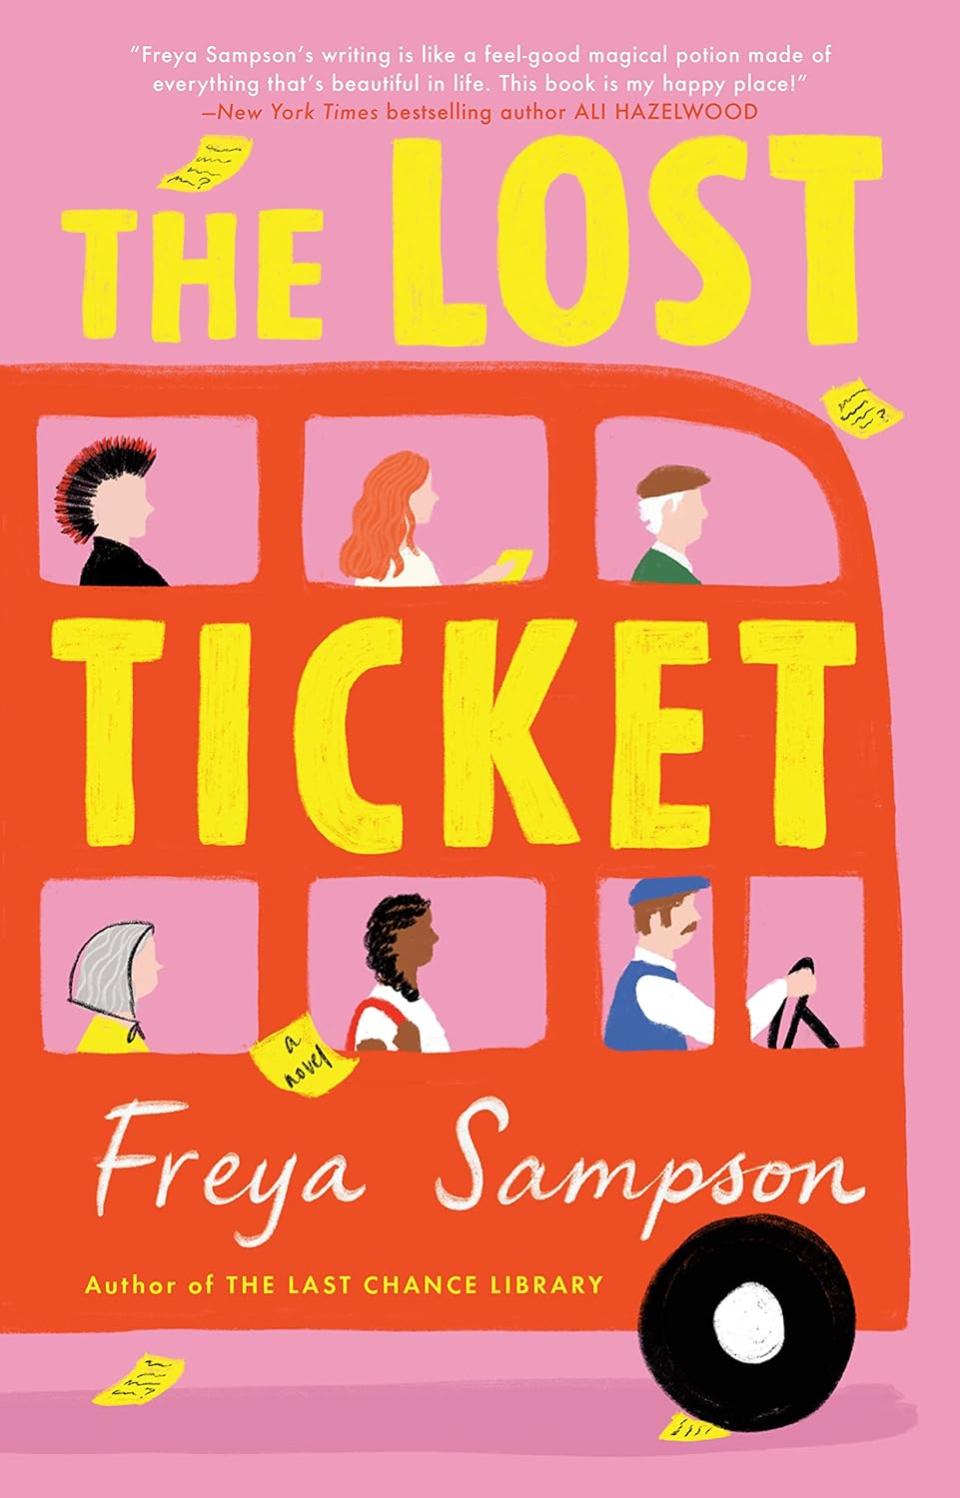 Best loneliness books: The Lost Ticket by Freya Sampson book cover shows a bright illustration of a red bus with people inside